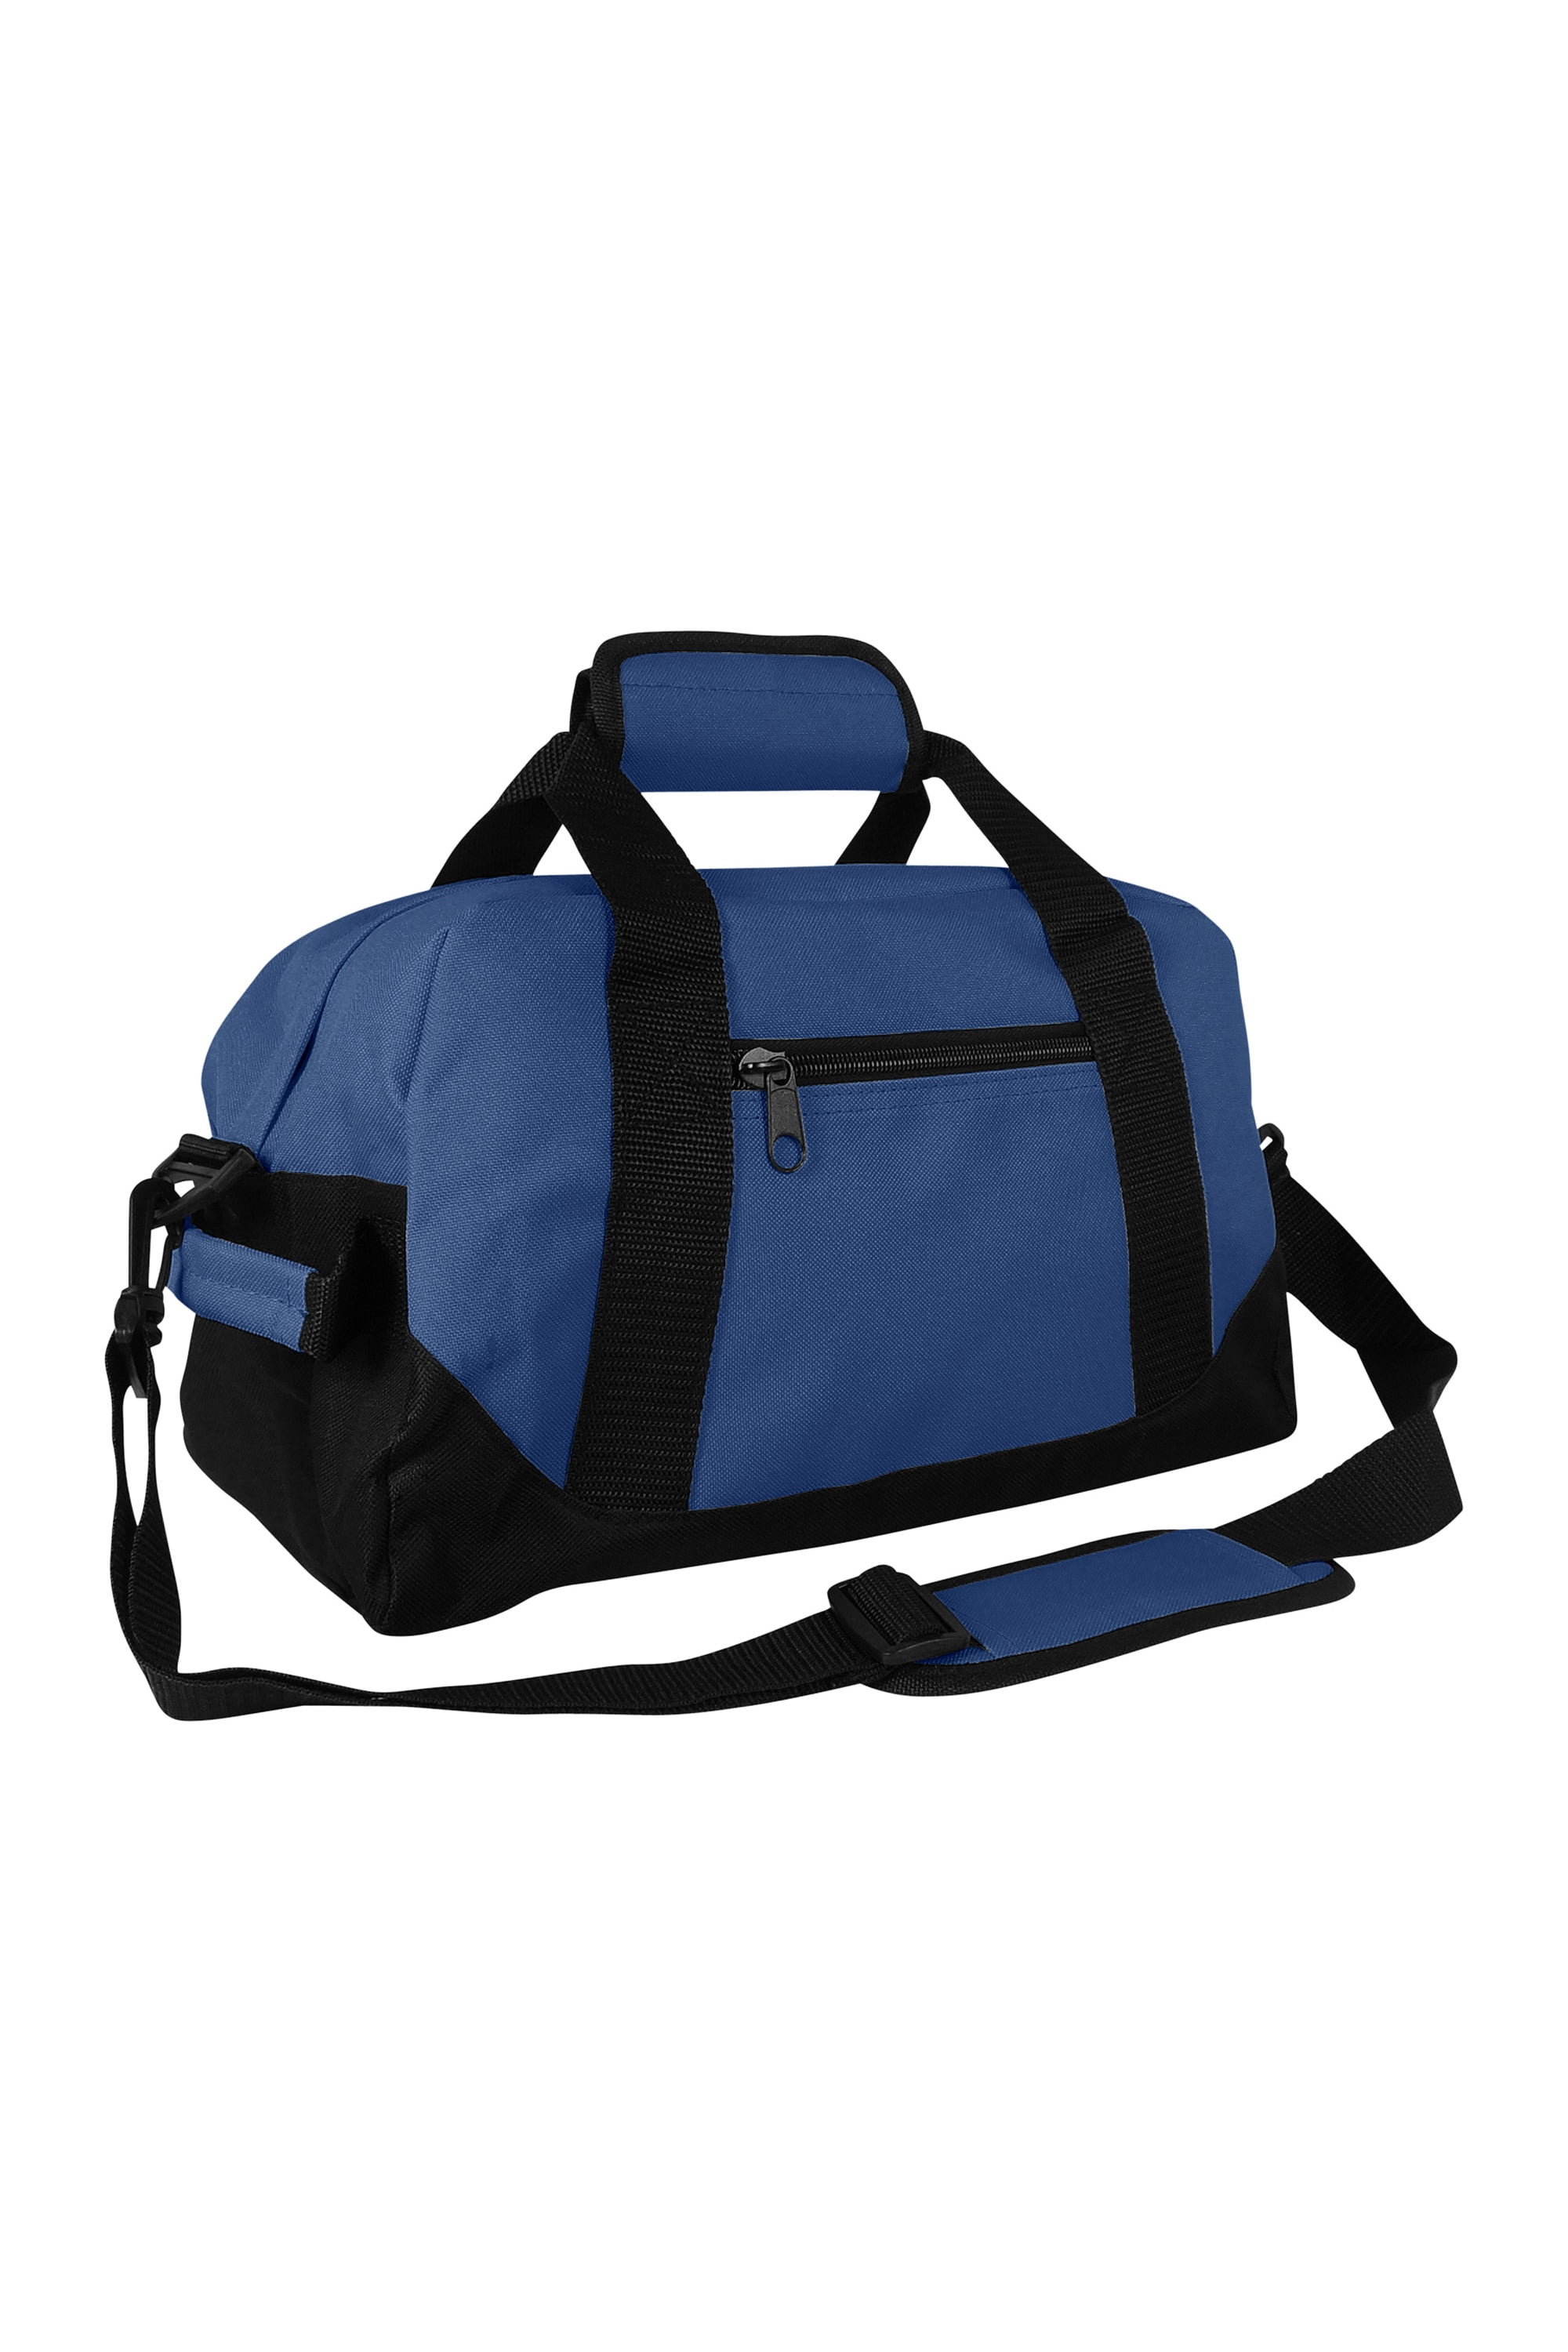 Duffle Bag Two-Toned Sports Gym Travel Bag in Navy Blue/Black and Red/Black 21" 